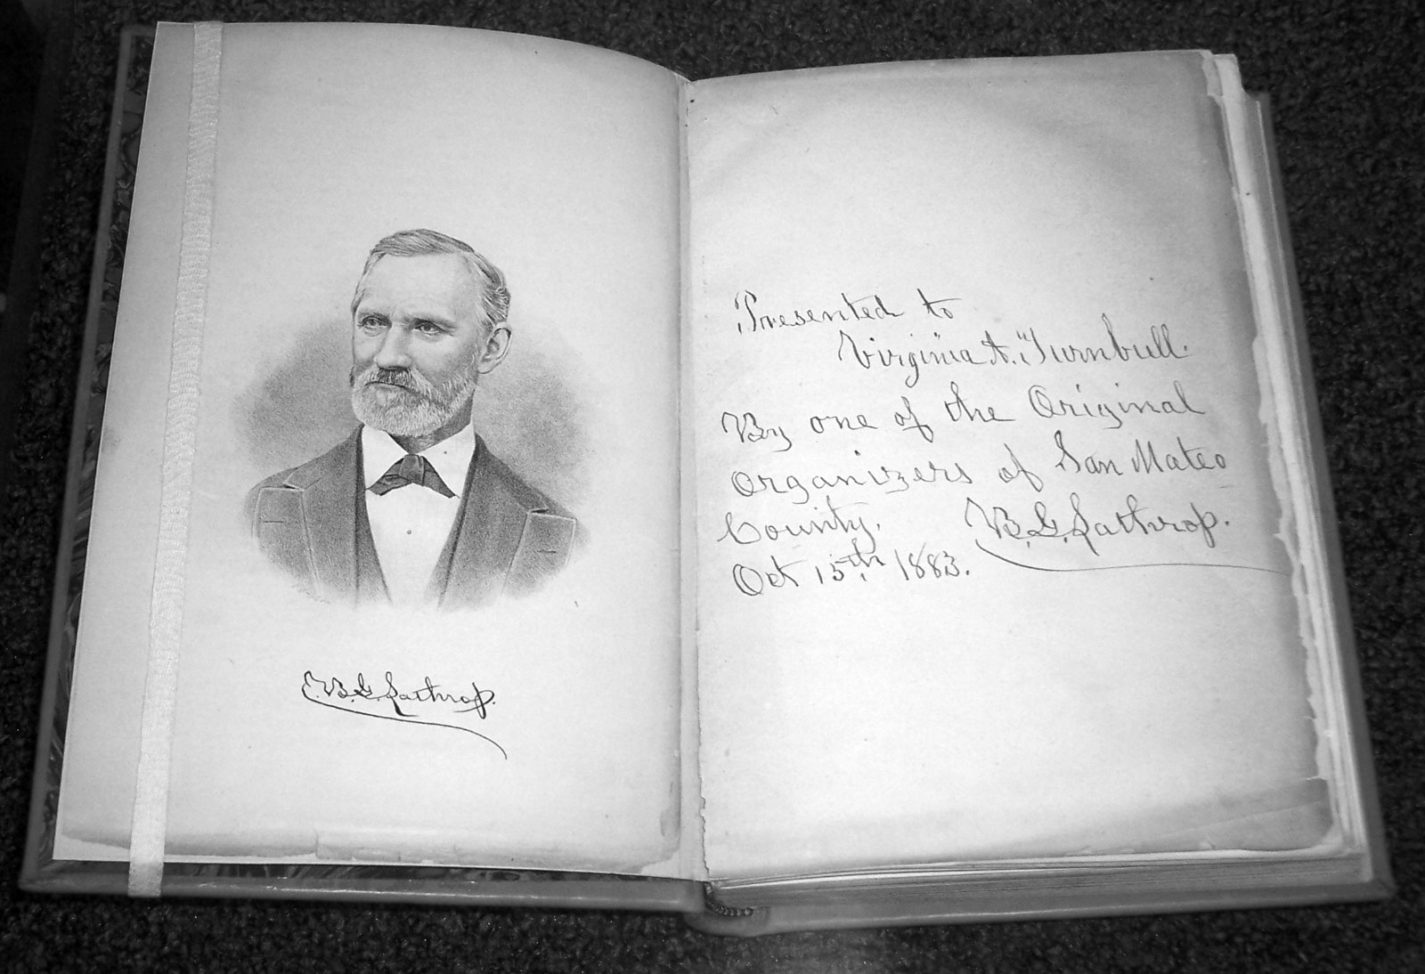 Archive book of the History of San Mateo County. Inscribed by Benjamin G. Lathrop. Presented to Virginia Turnbull By one of the Original Organizers of San Mateo County, B. G. Lathrop Oct 15th. 1883.